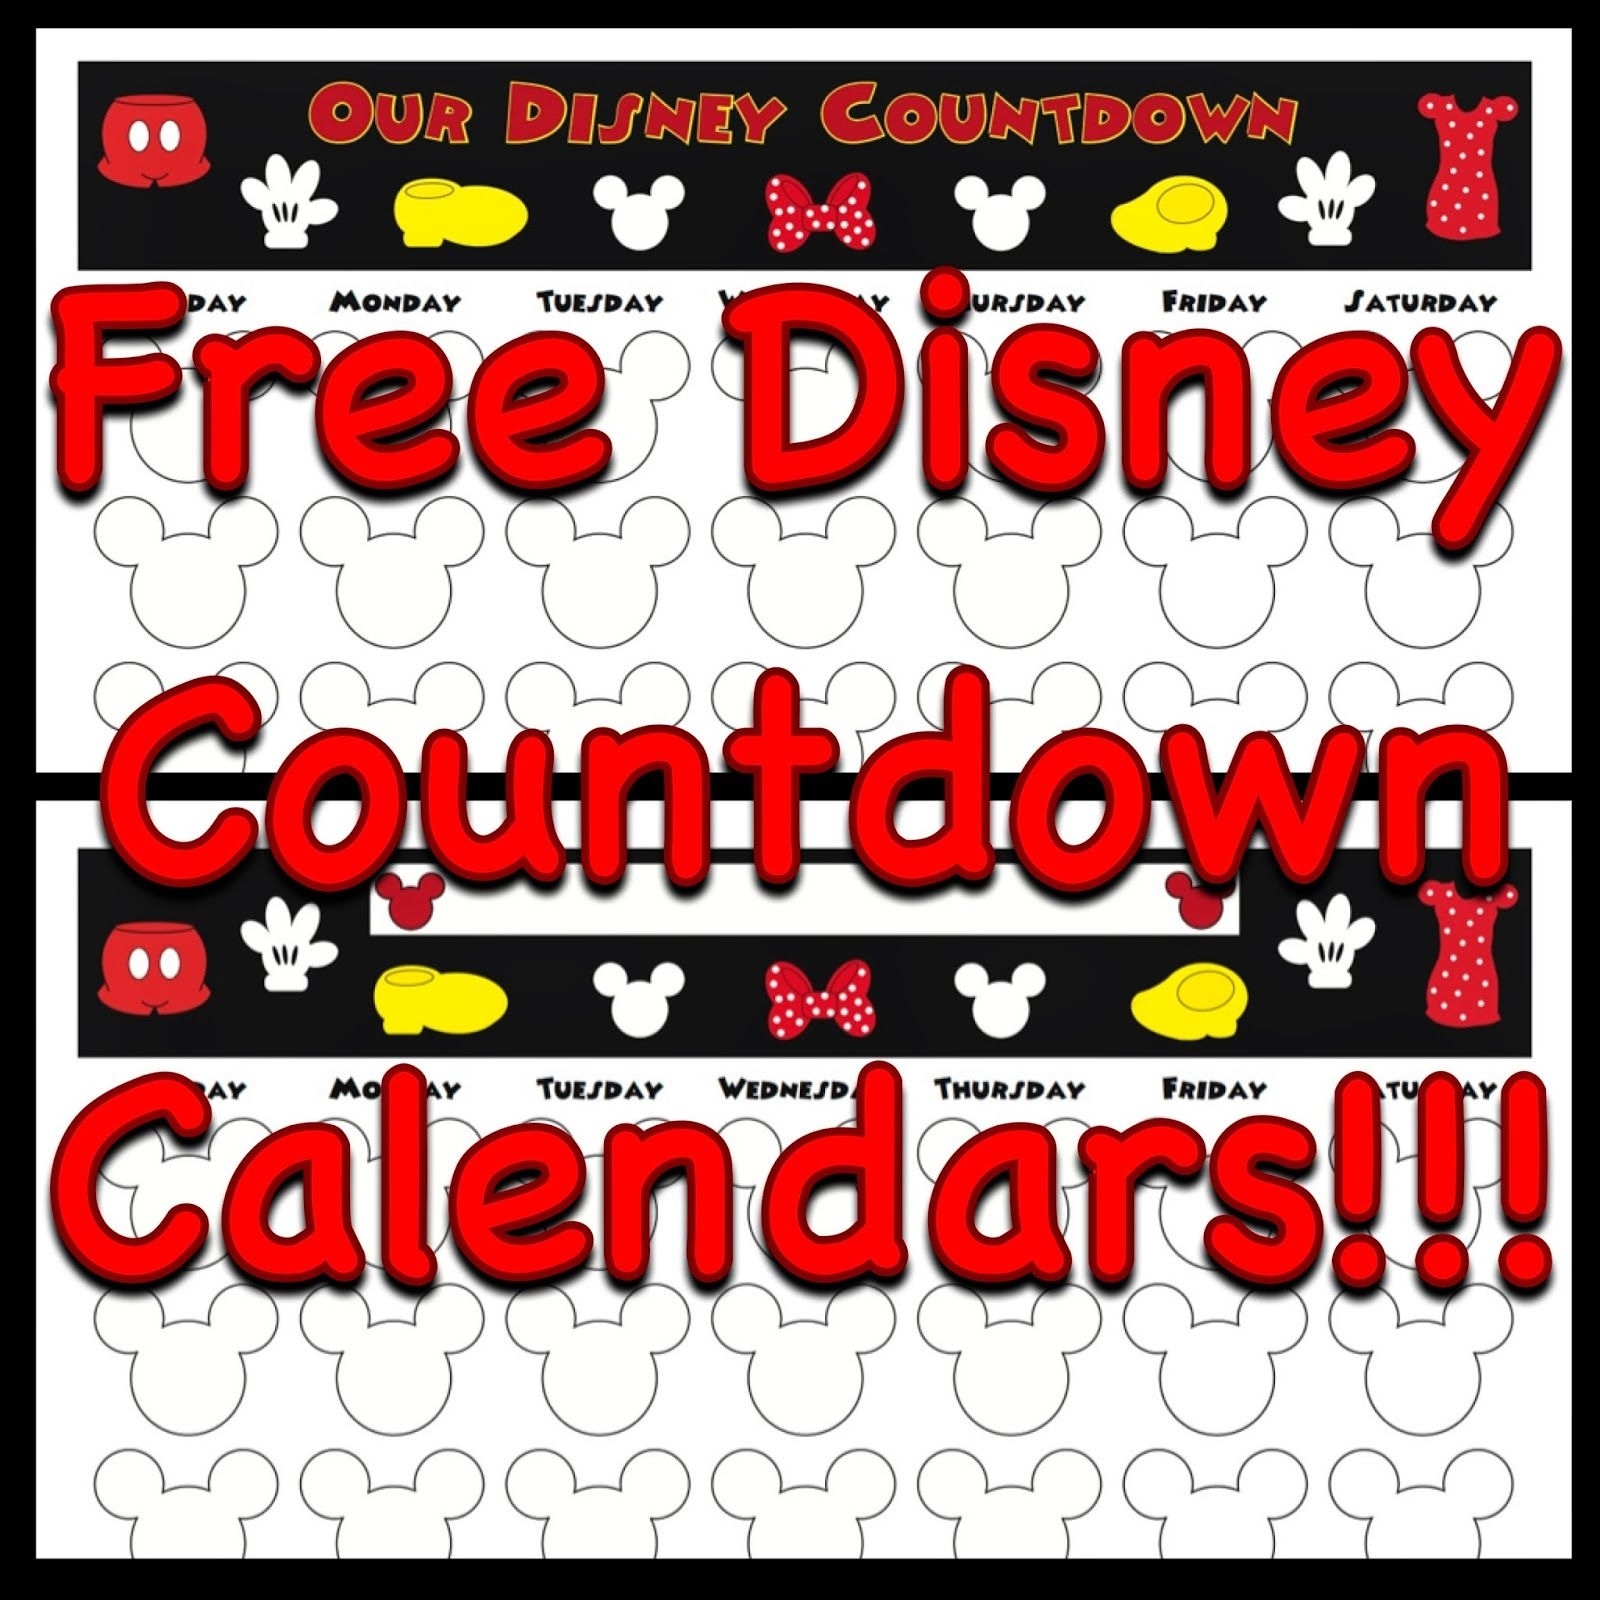 Free, Printable Countdown Calendars To Use For Your Next Free Printable Countdown Calendar Days